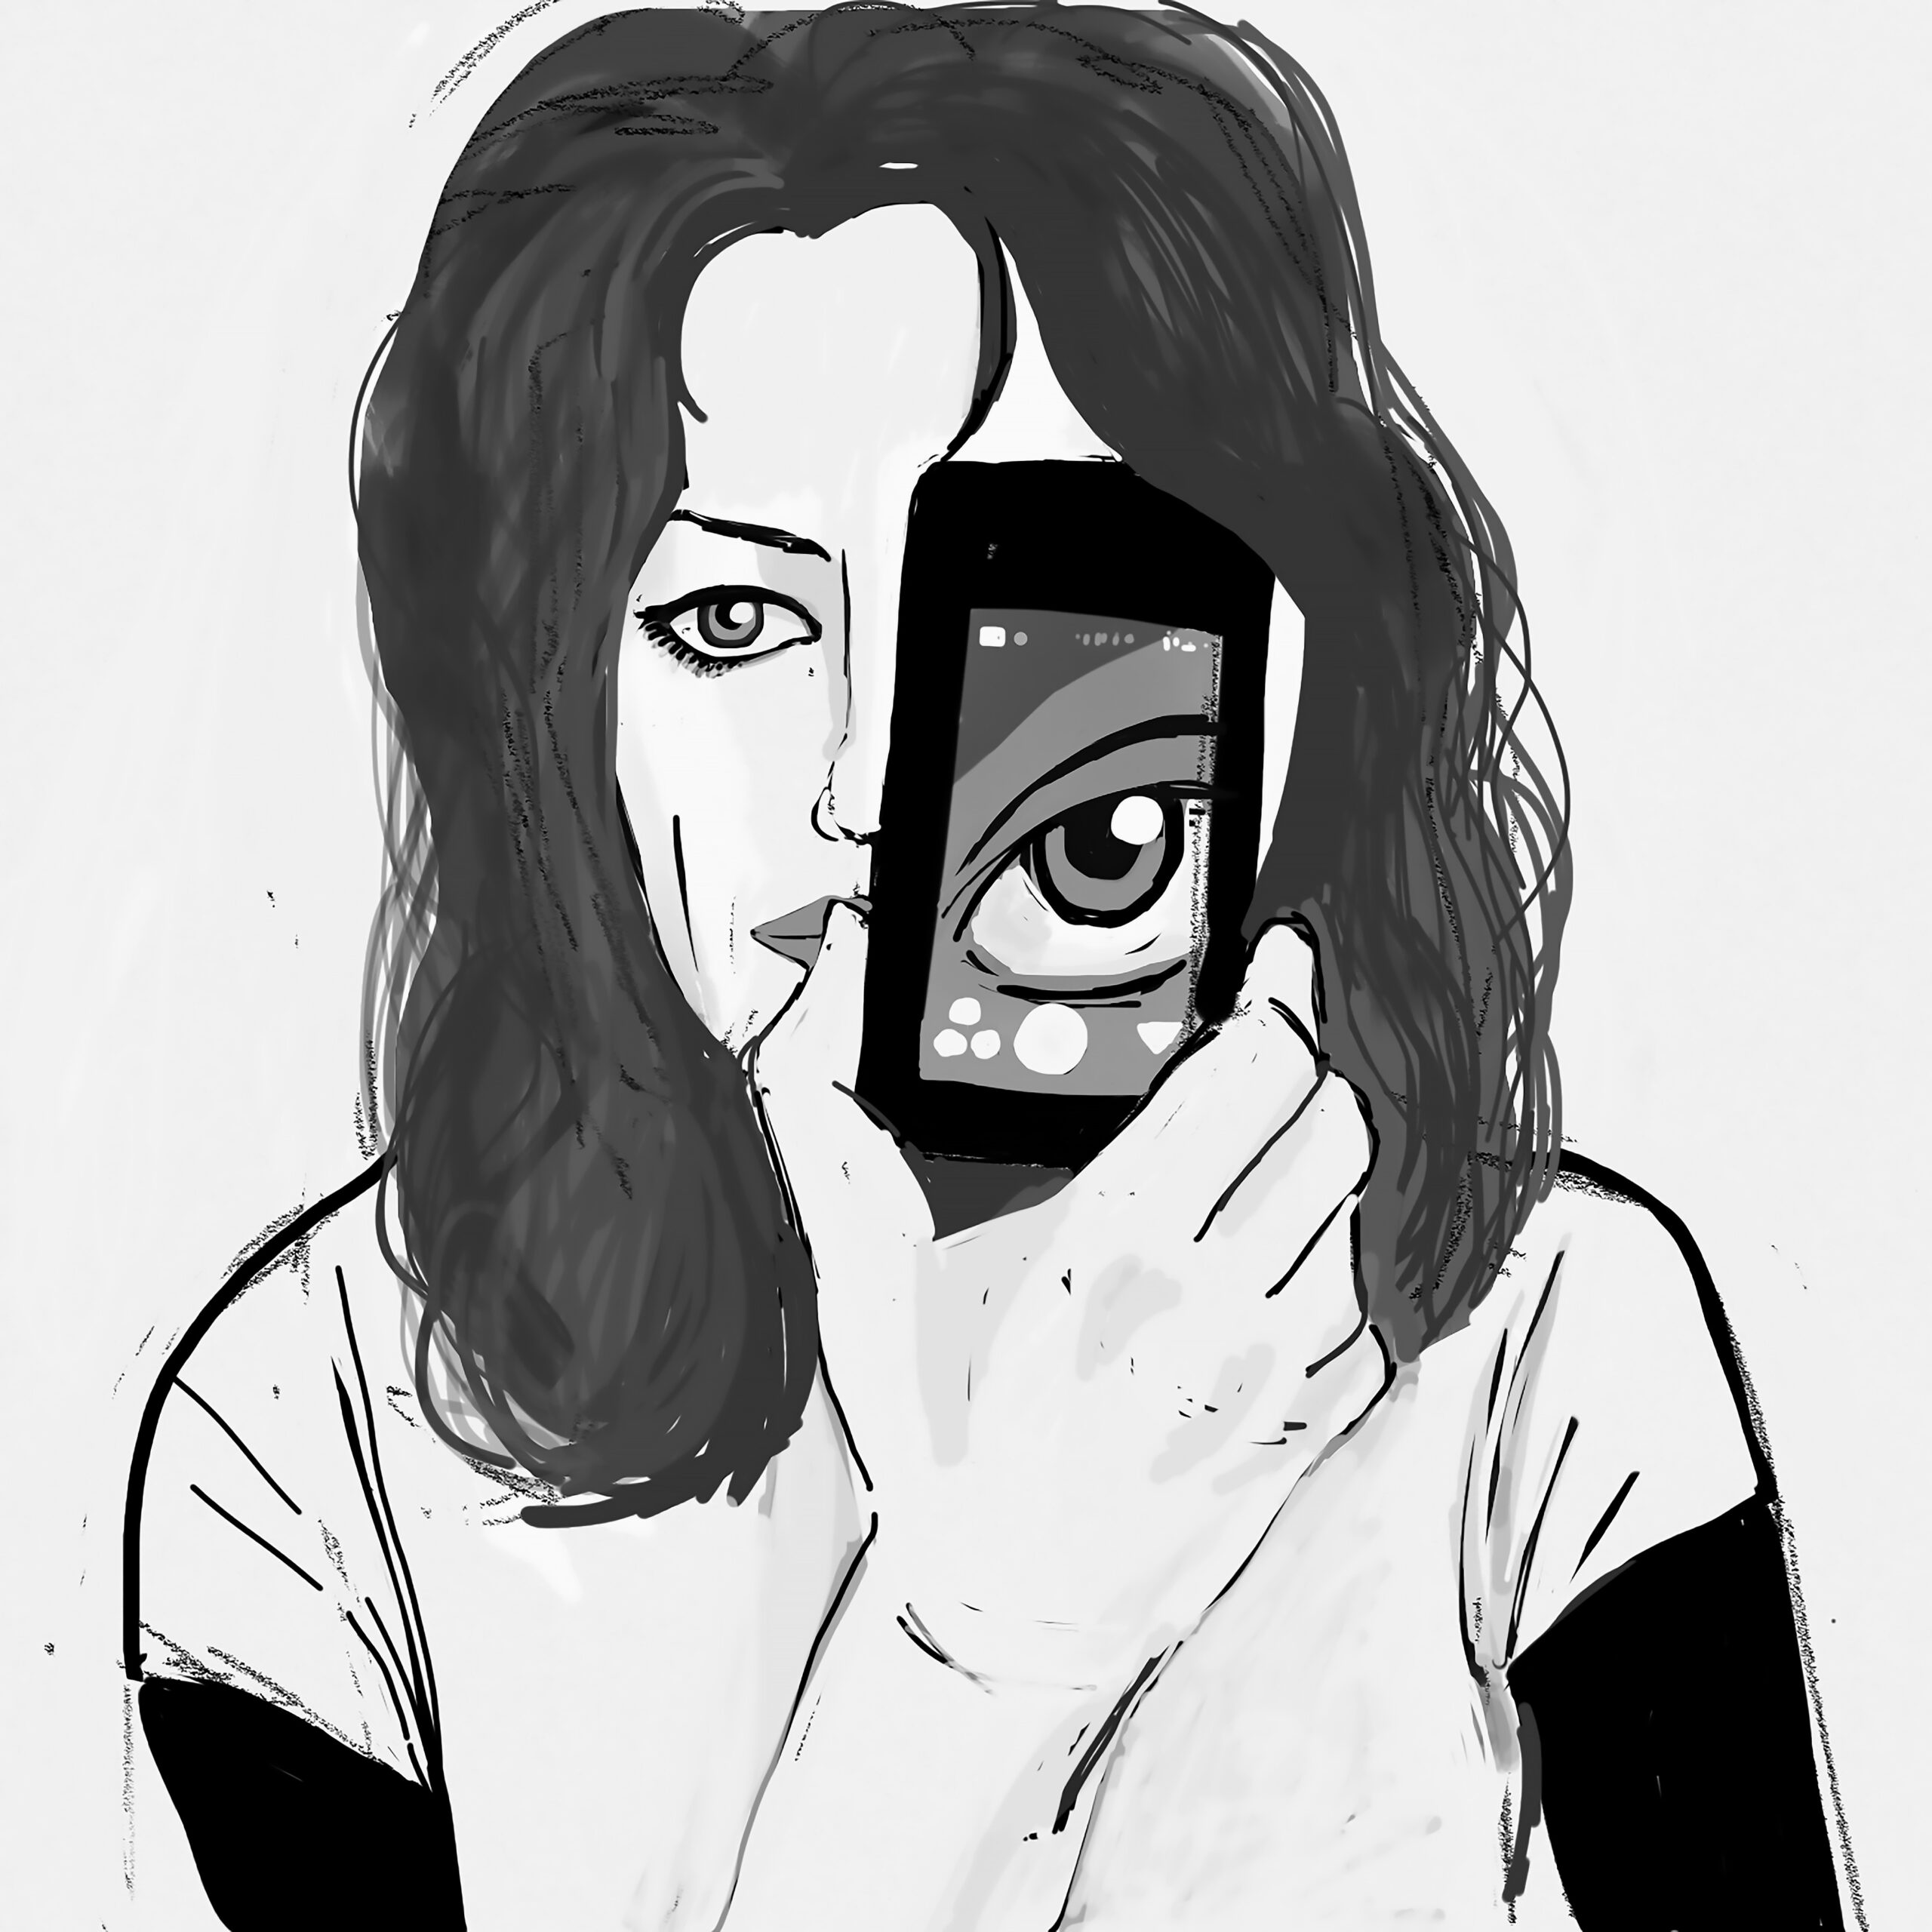 image of a person holding their phone in front of their face